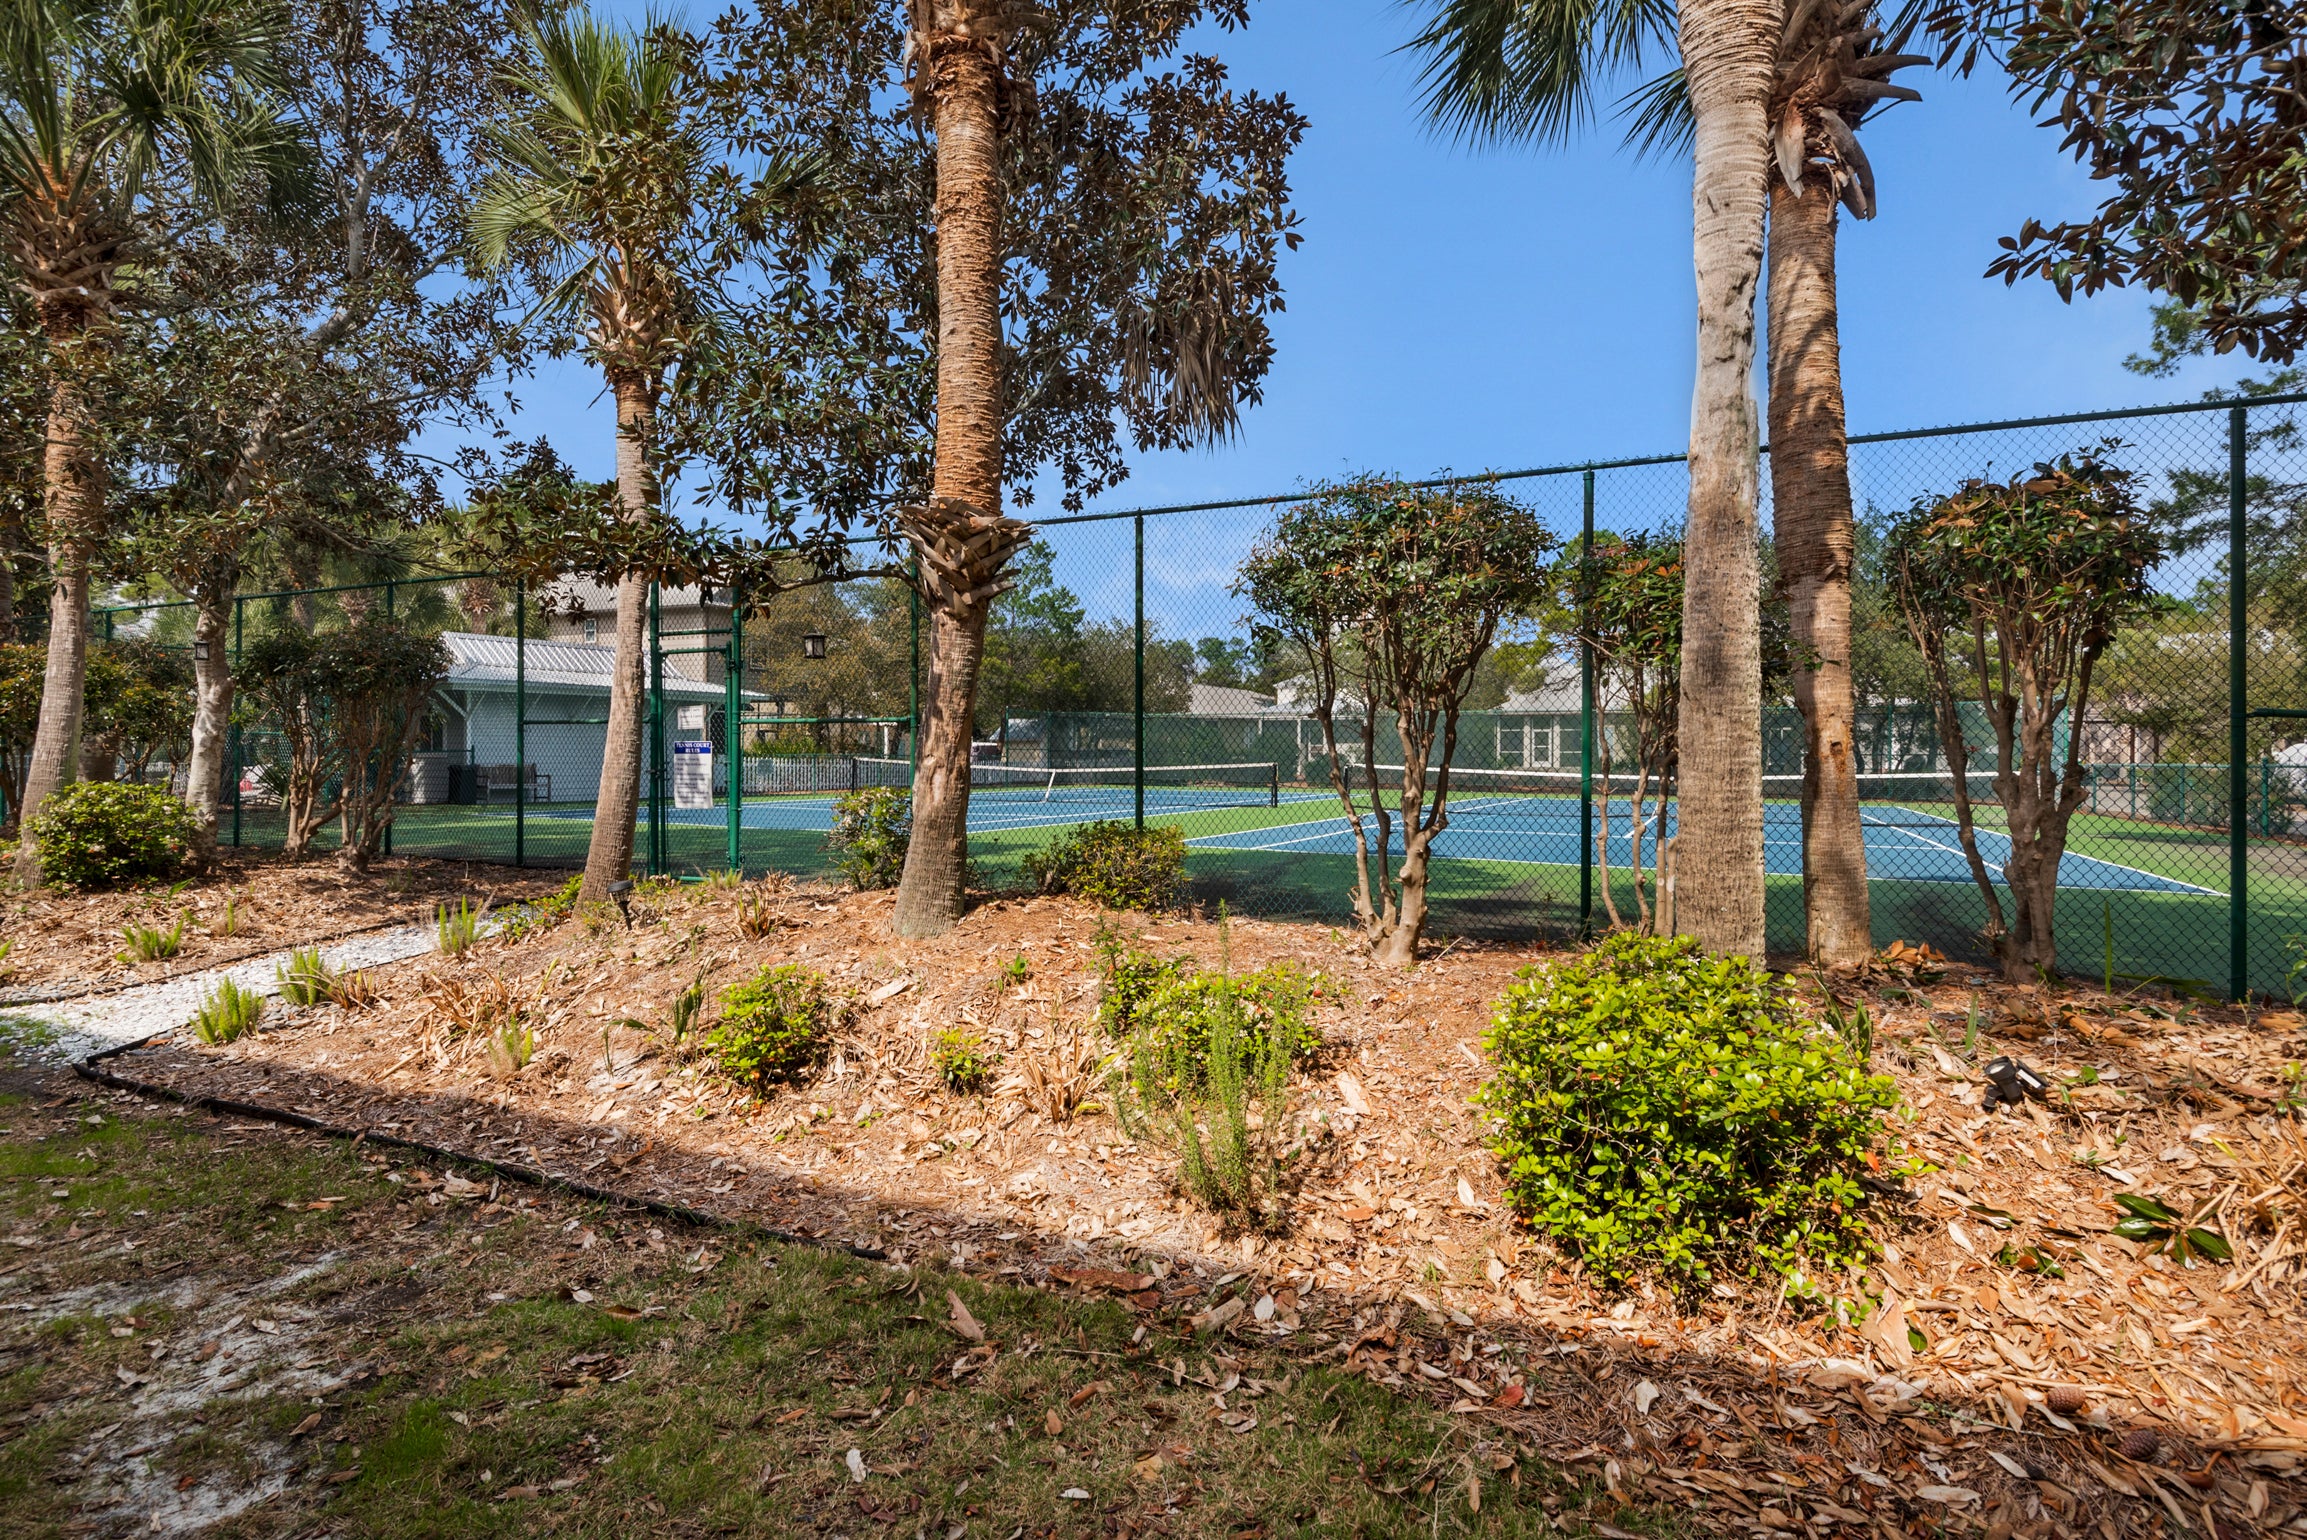 Close to the tennis courts